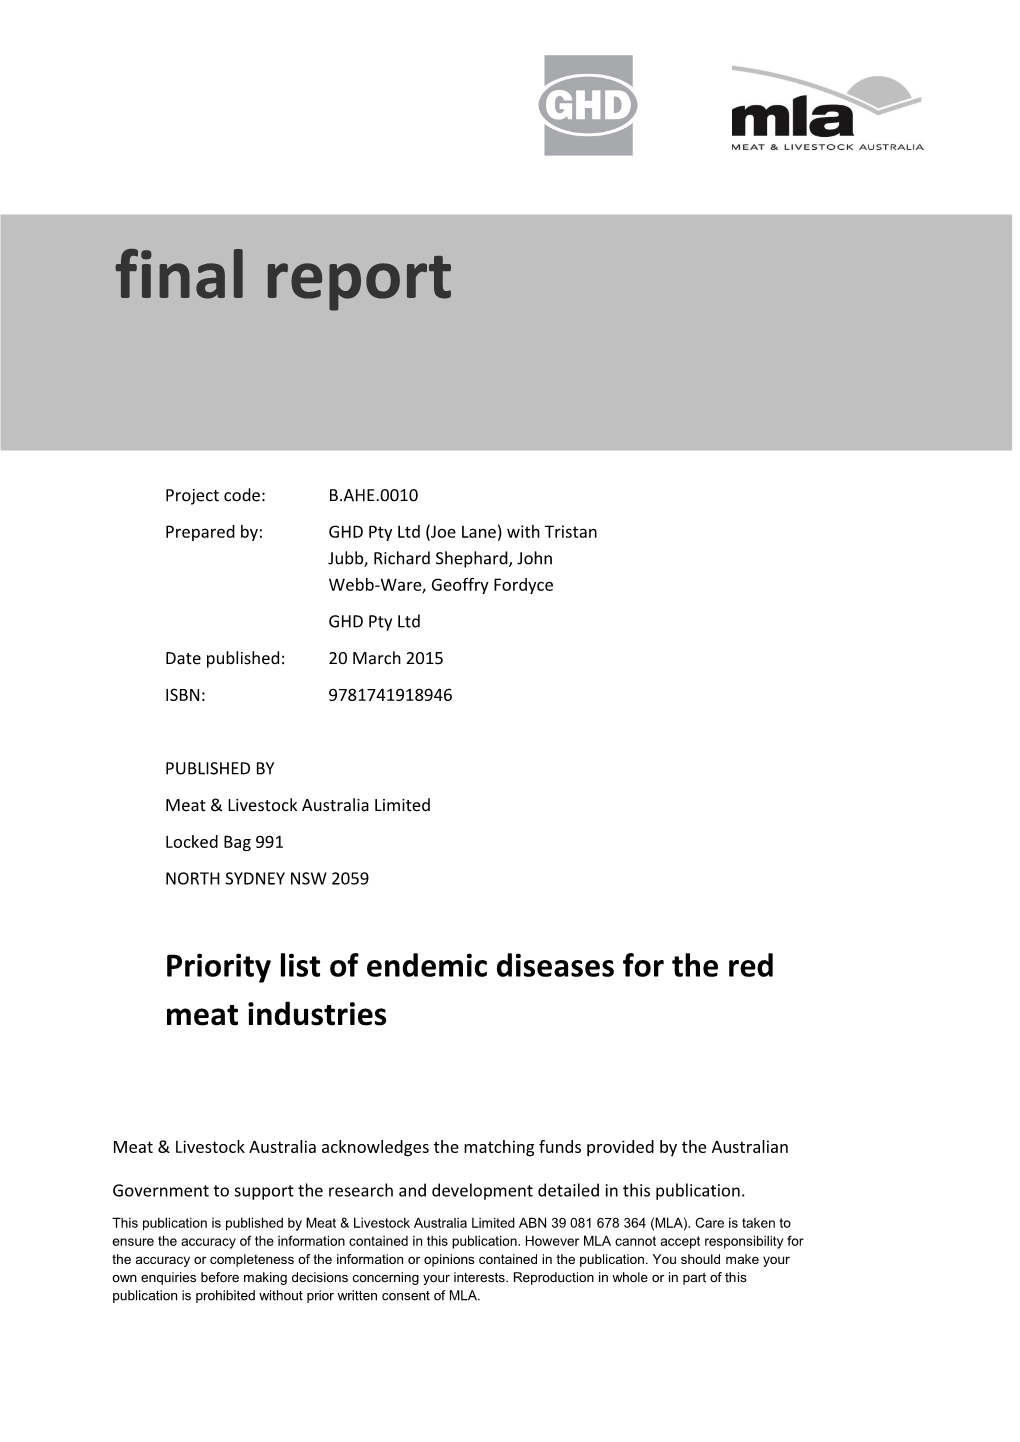 B.AHE.0010 Final Report: Priority List of Endemic Diseases for the Red Meat Industries